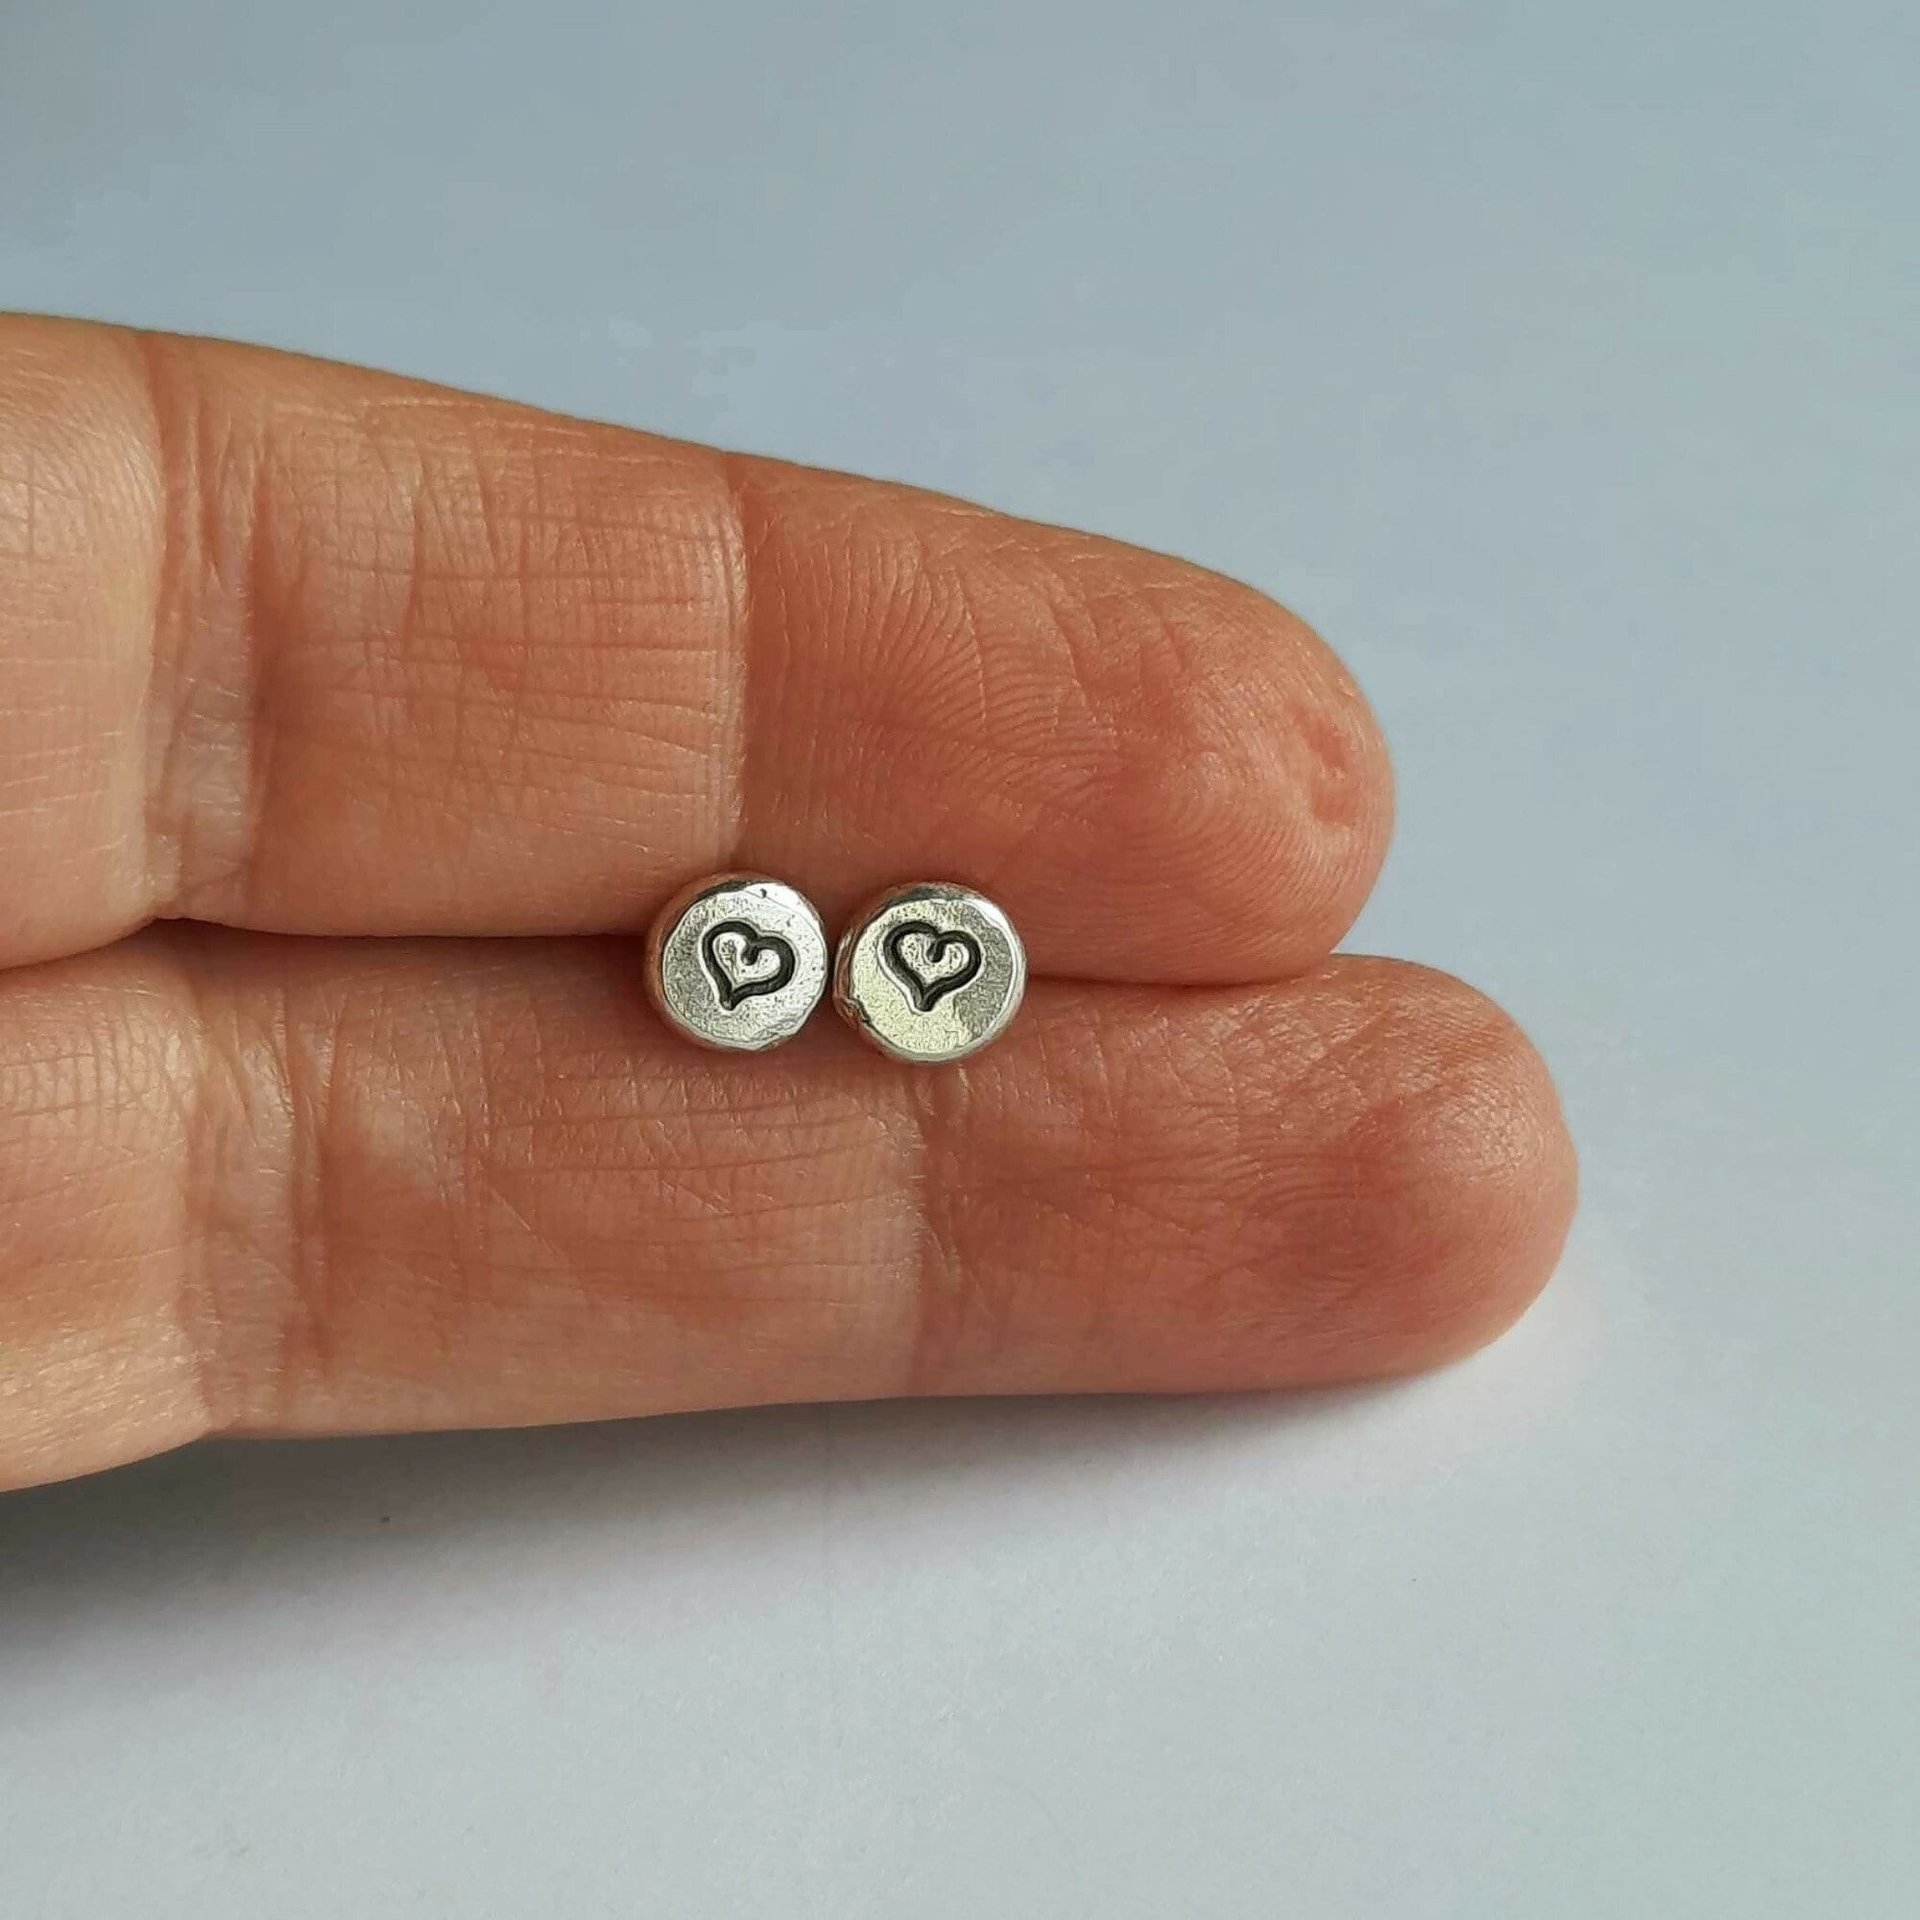 Reclaimed 925 sterling silver love heart stud earrings, handcrafted by The Tiny Tree Frog Jewellery